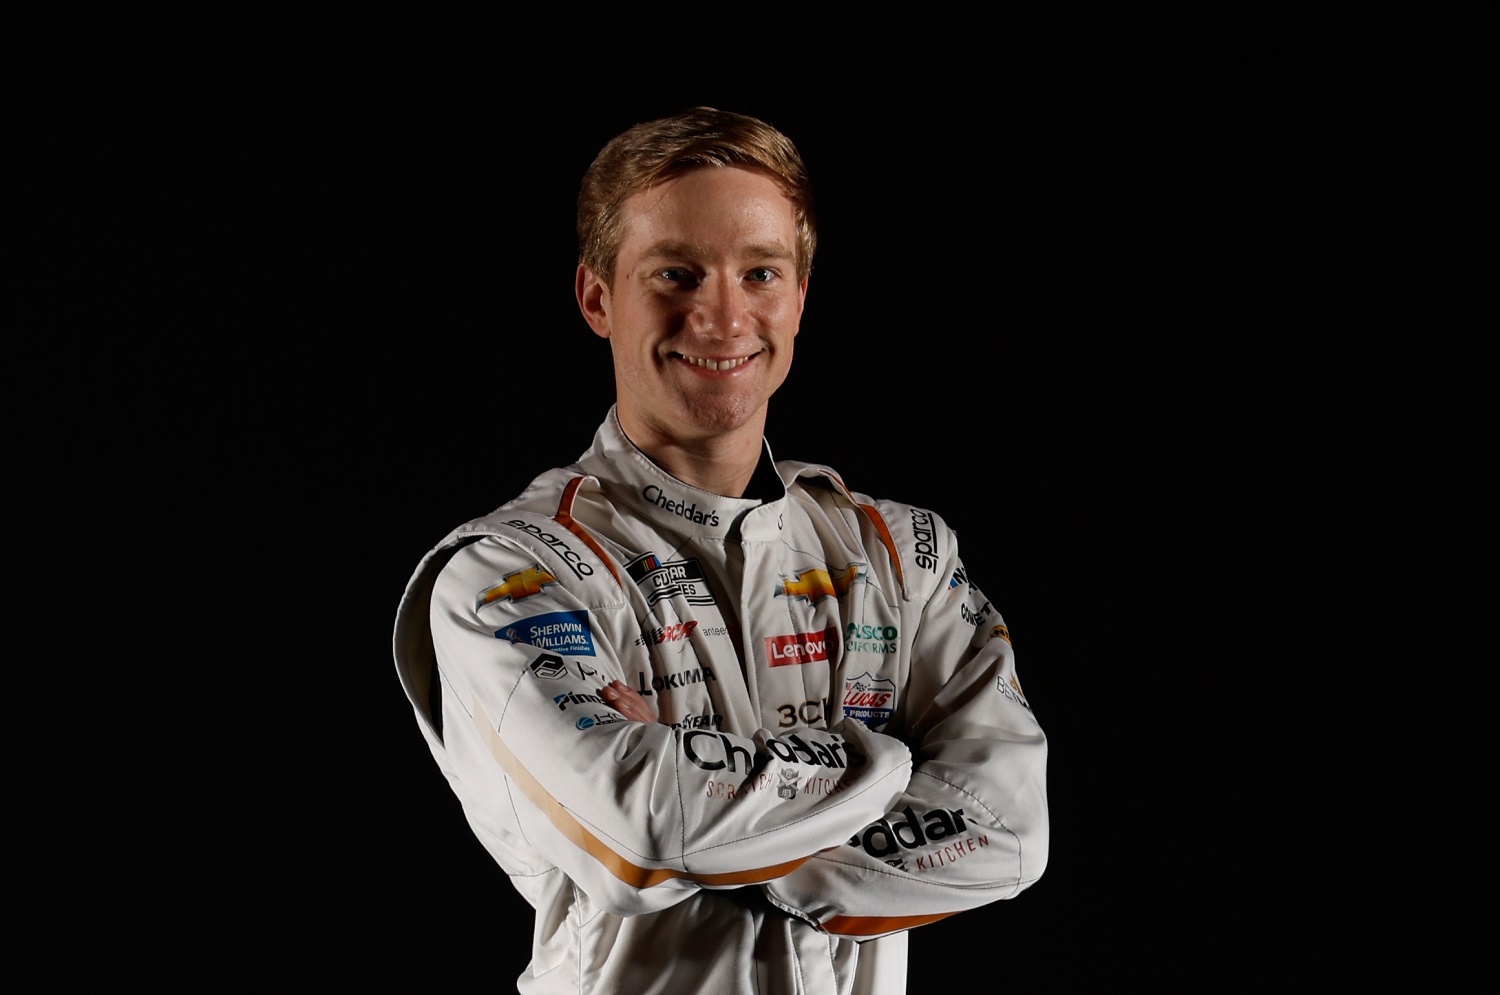 Tyler Reddick poses for a photo during NASCAR Production Days at Clutch Studios on Jan. 19, 2022, in Concord, North Carolina.